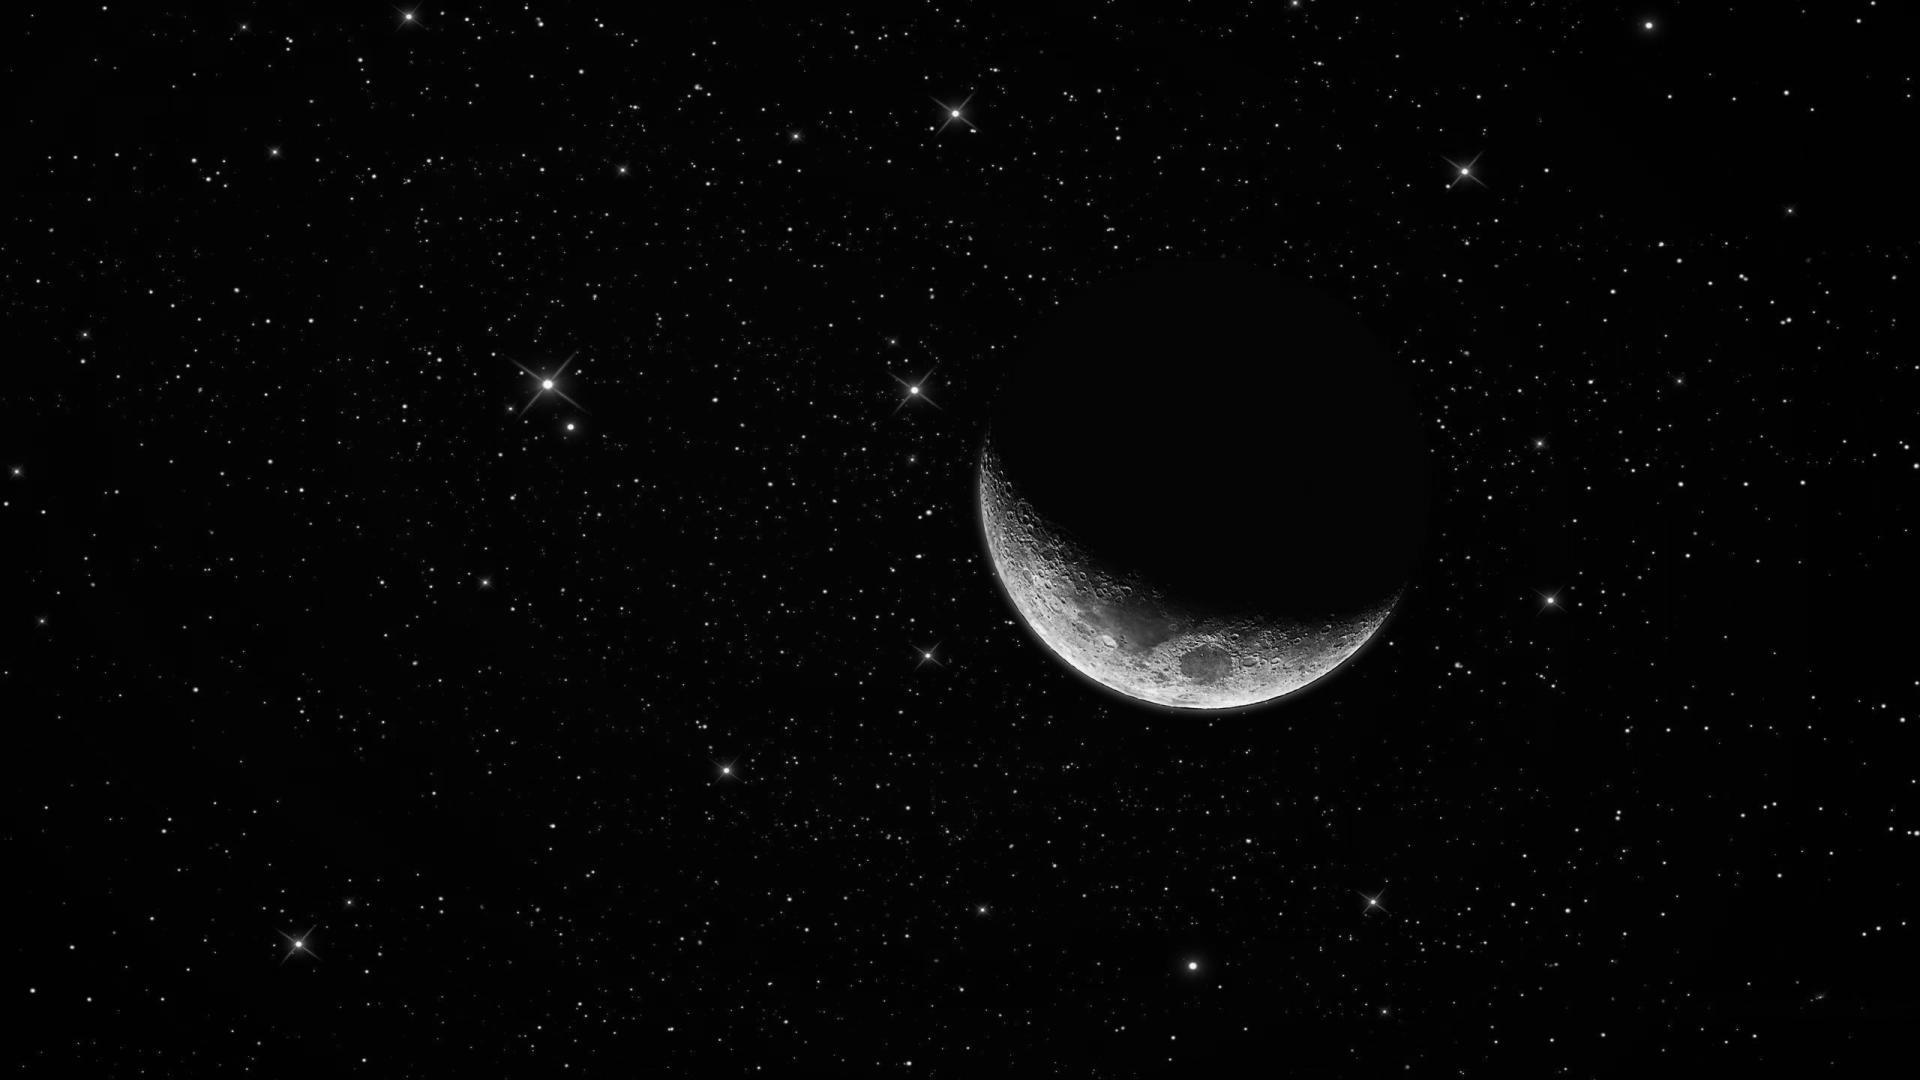 Gray_moon_waning_crescent_darkness_starry_sky_of_hd Wallpaper